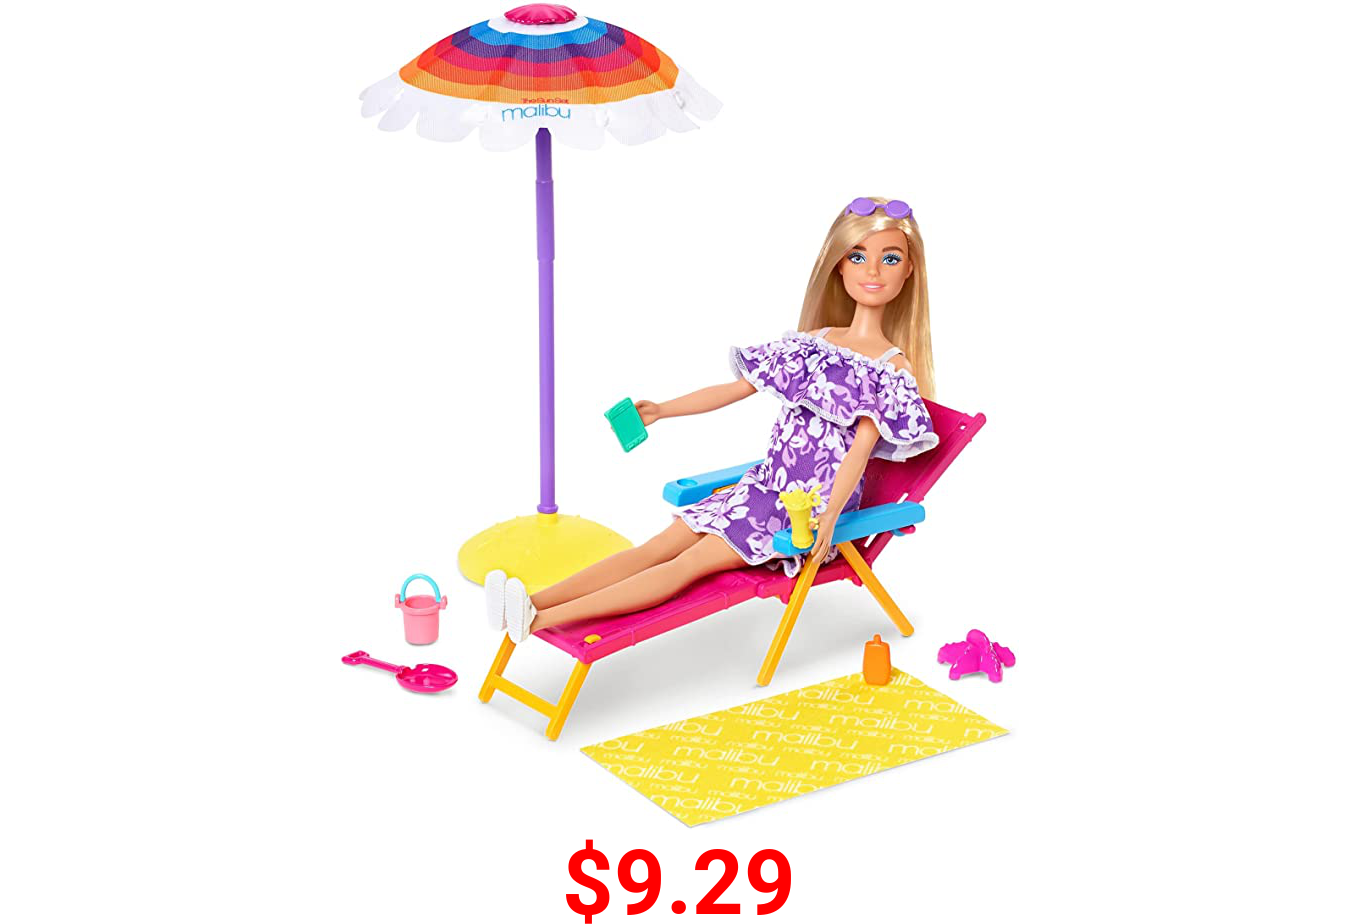 Barbie Loves The Ocean Beach-Themed Playset, with Lounge Chair, Umbrella & Accessories, Made from Recycled Plastics, Gift for 3 to 7 Year Olds